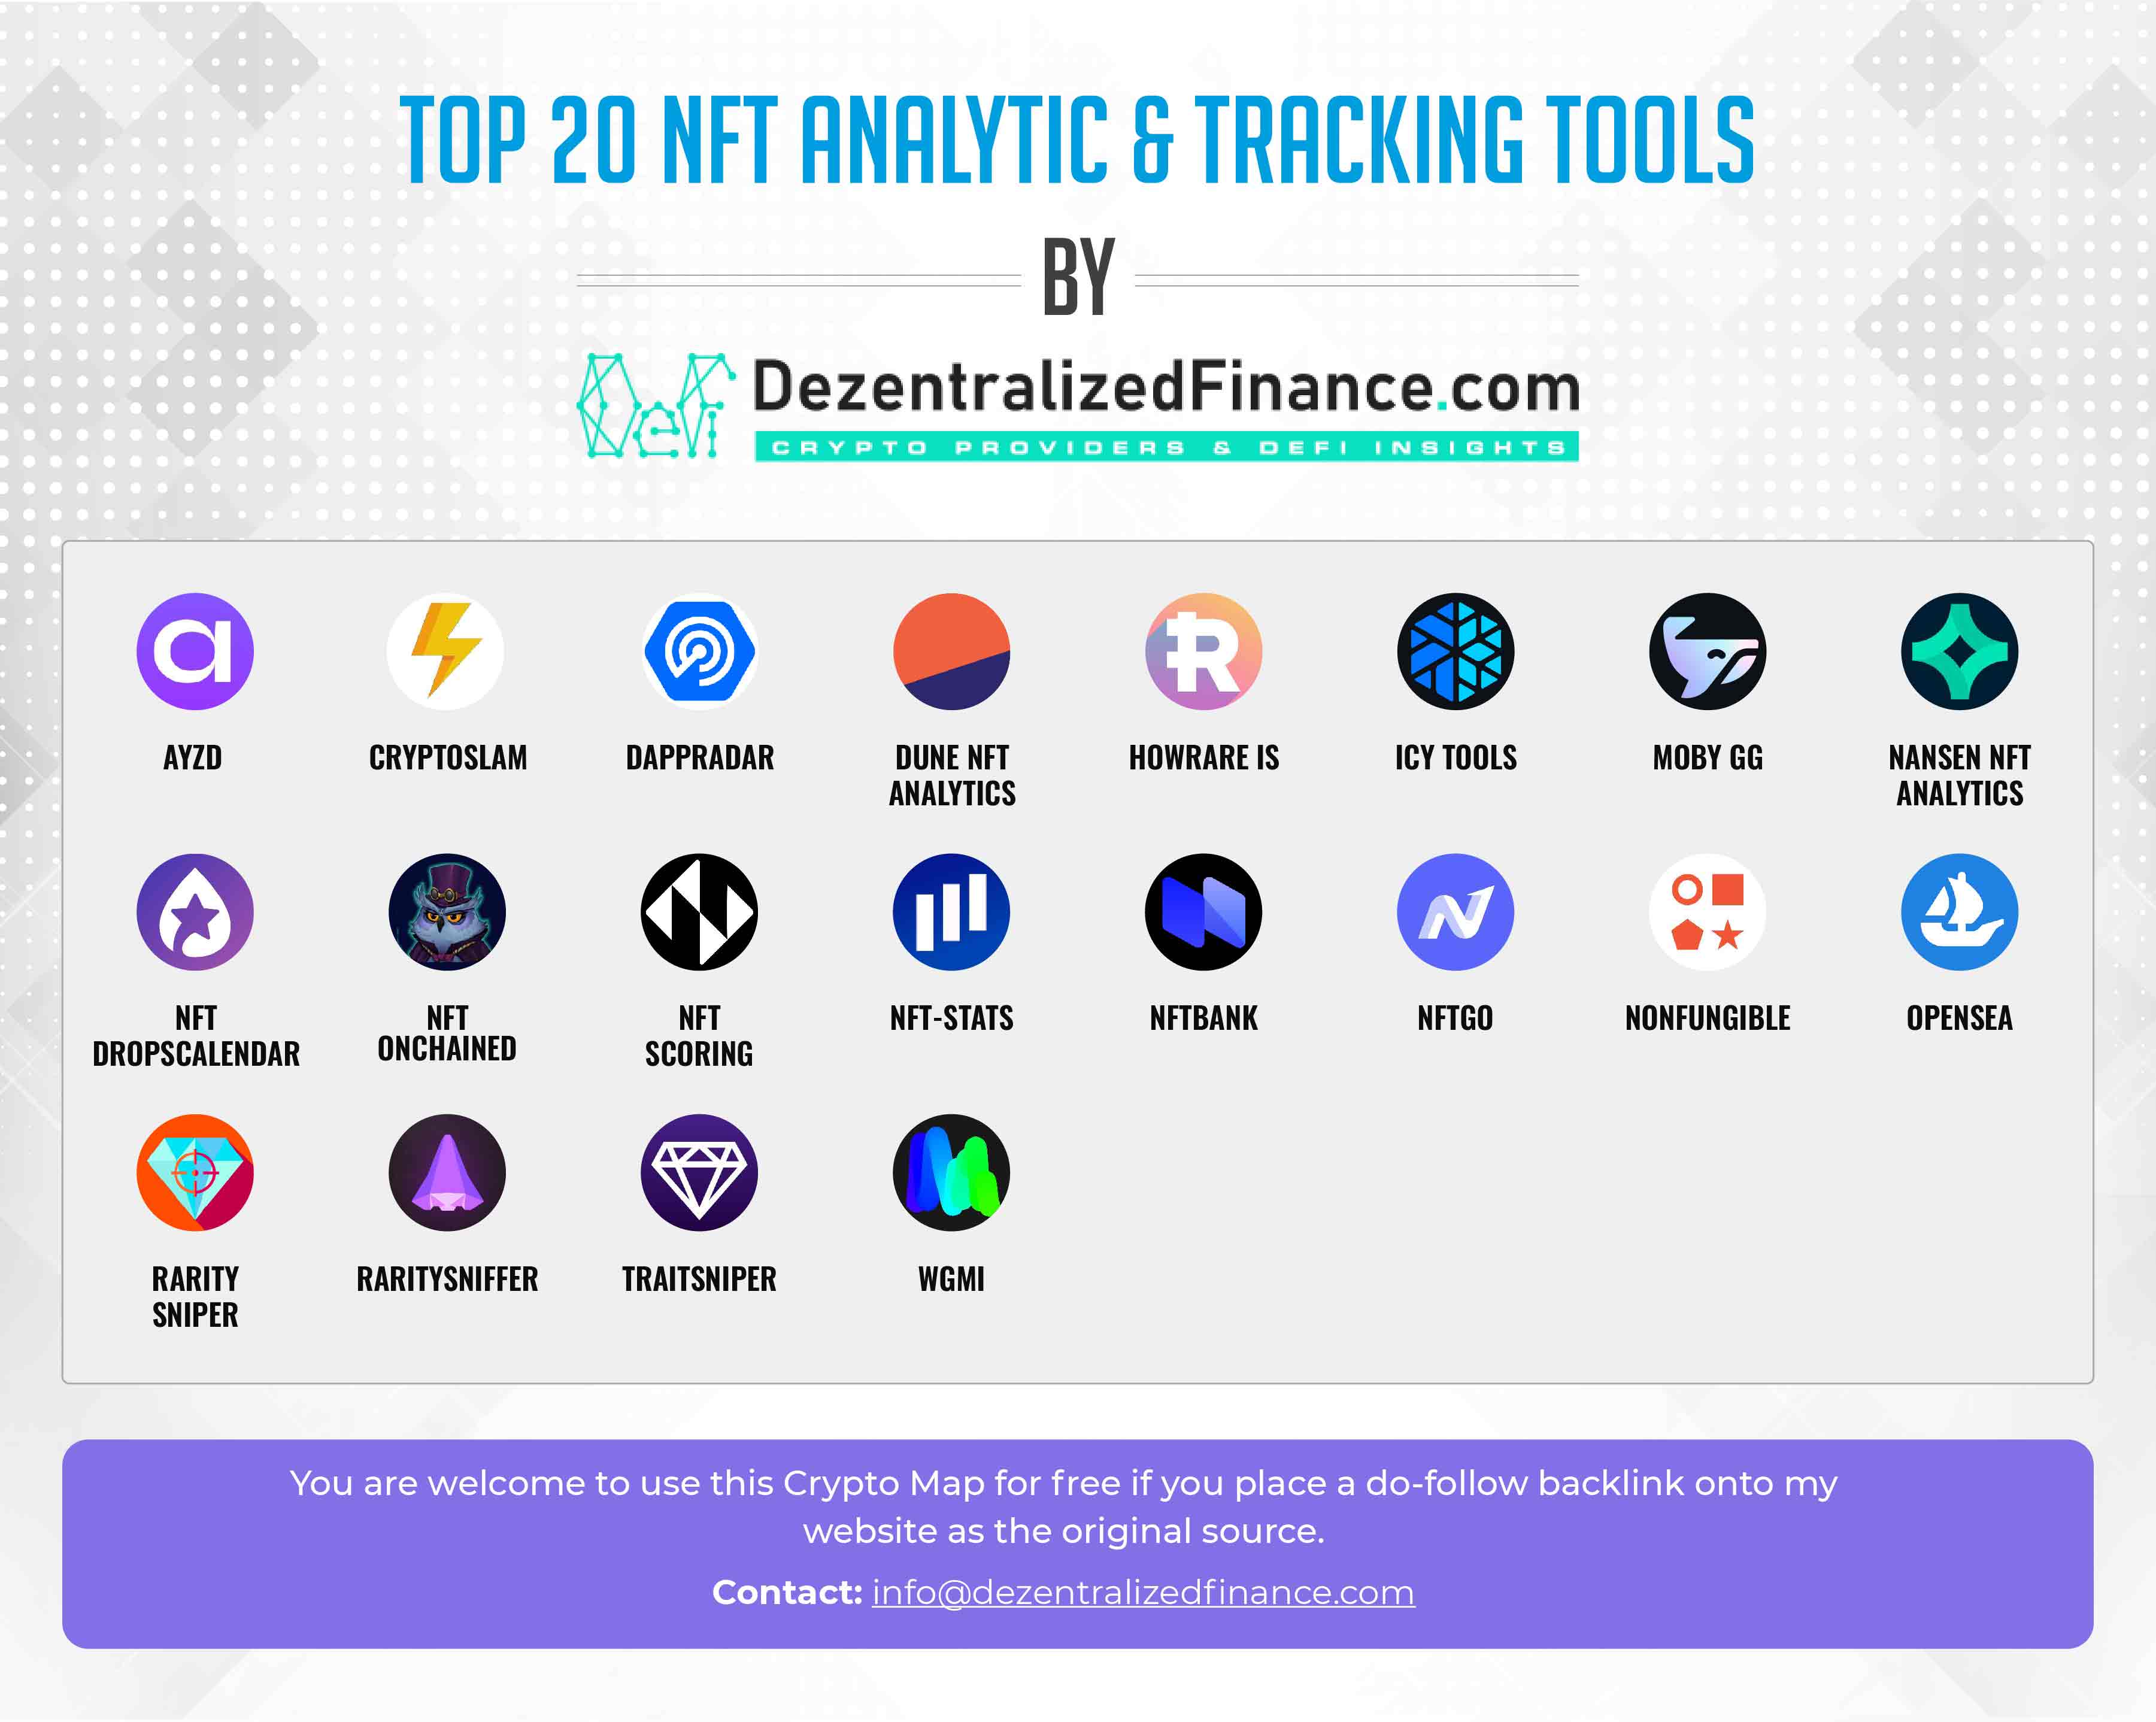 Top 20 NFT Analytic Tracking Tools